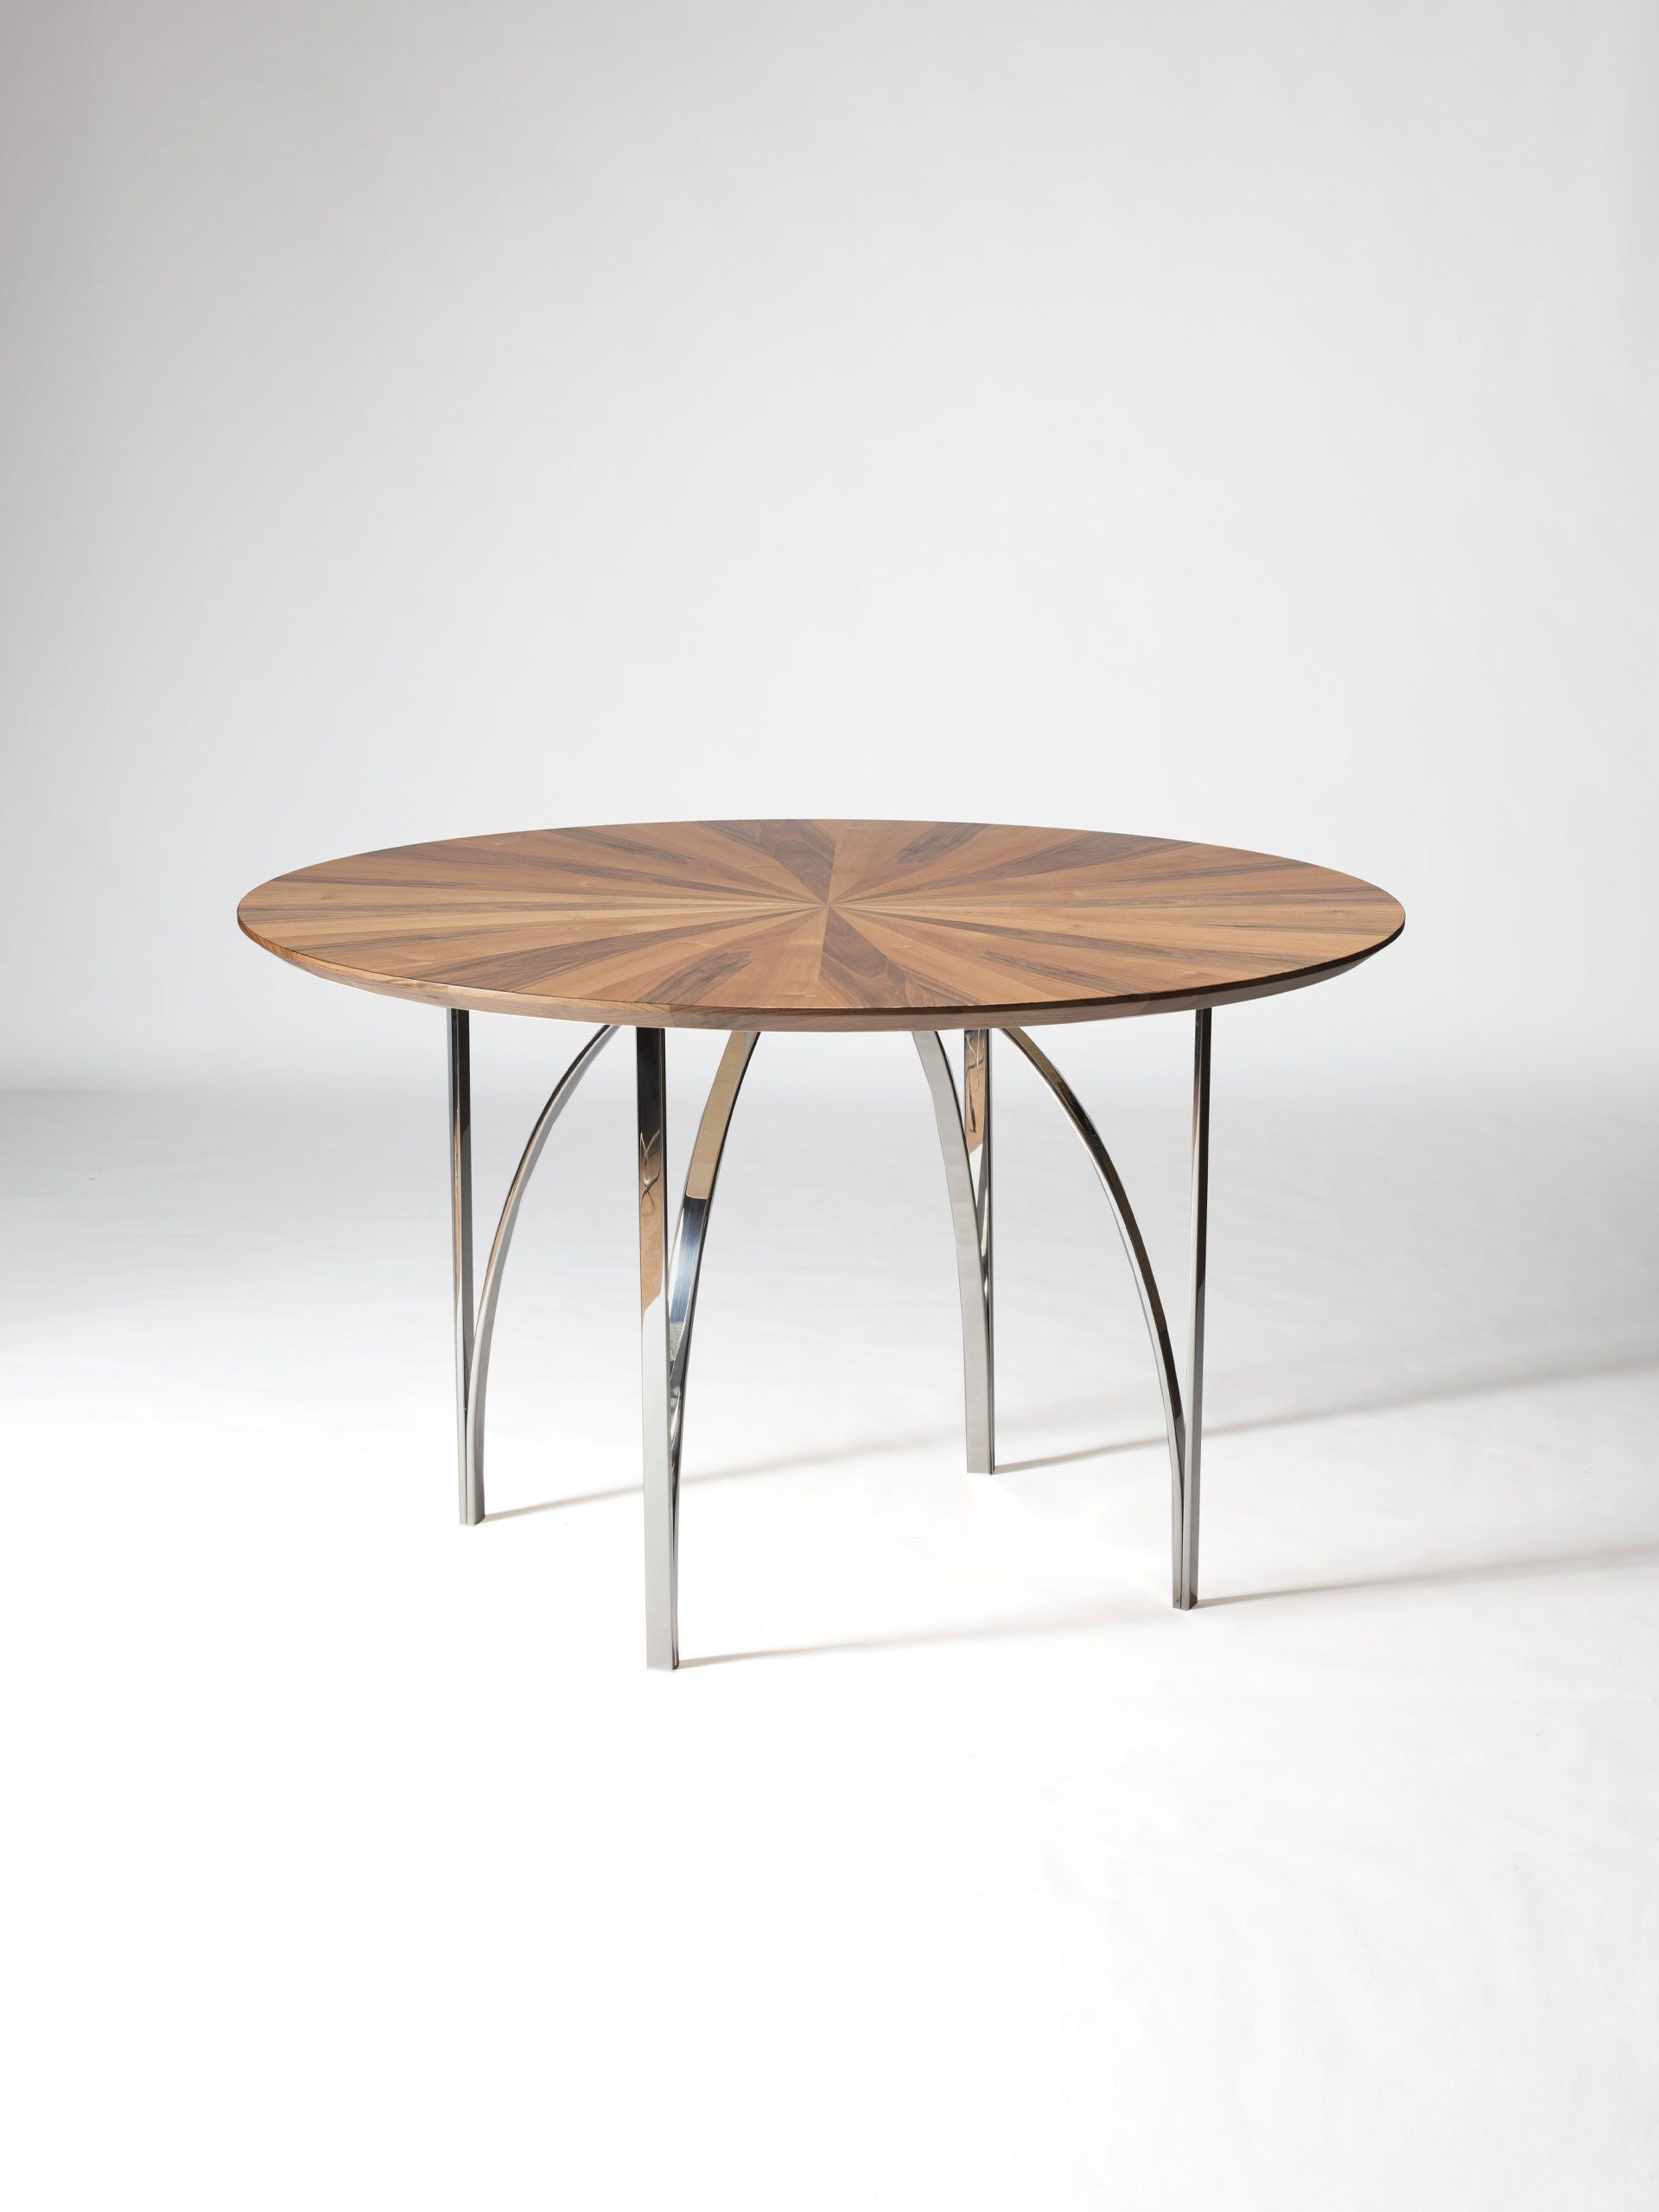 Archie European Walnut Table – Galleria Italia For Well Known Walnut Outdoor Tables (View 13 of 15)